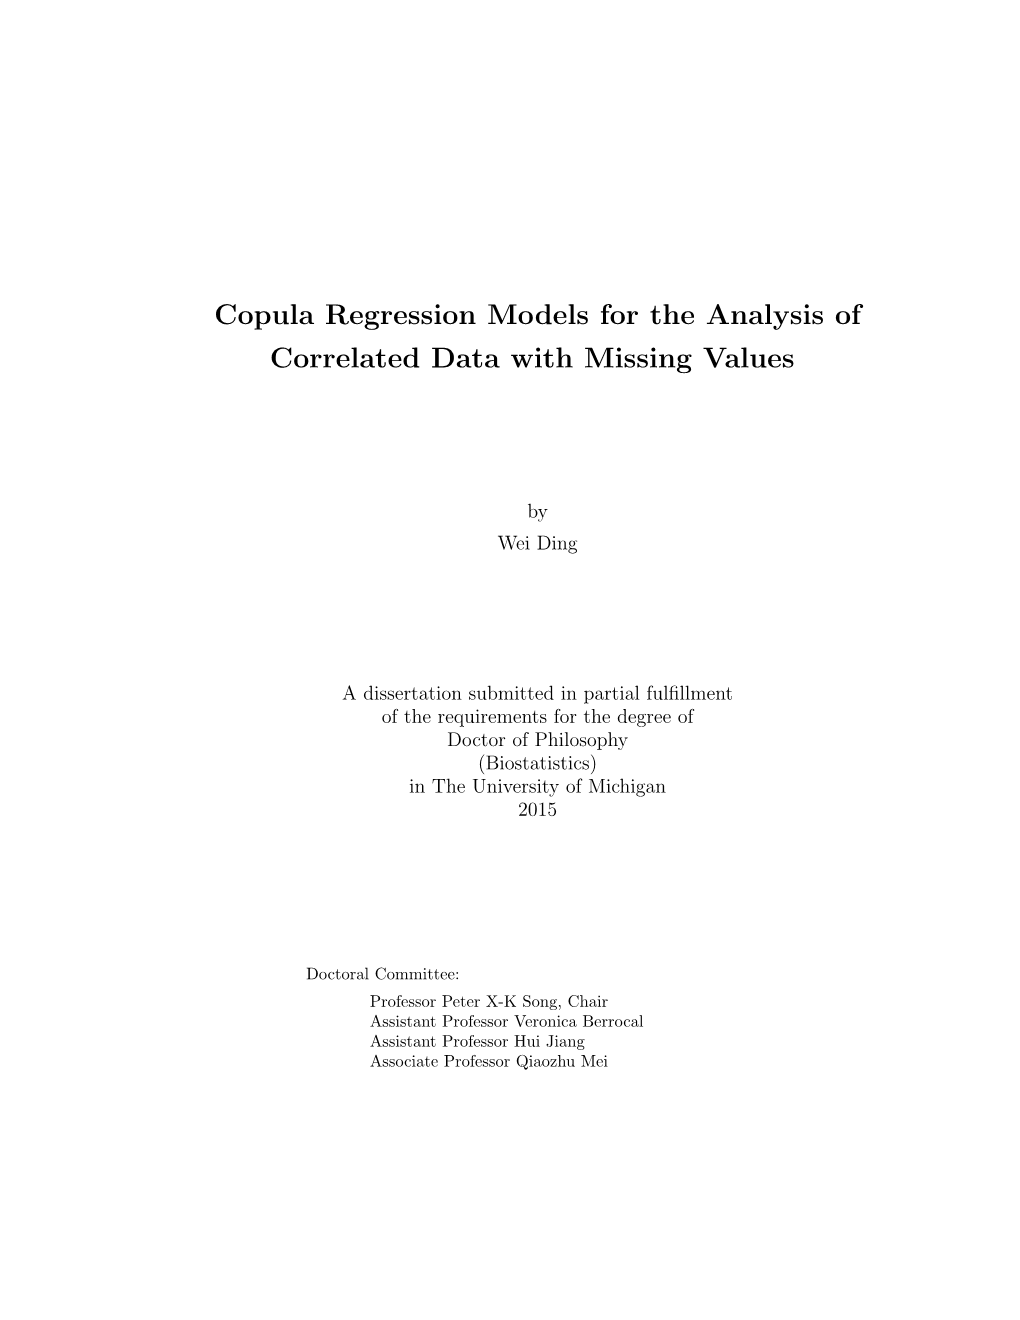 Copula Regression Models for the Analysis of Correlated Data with Missing Values